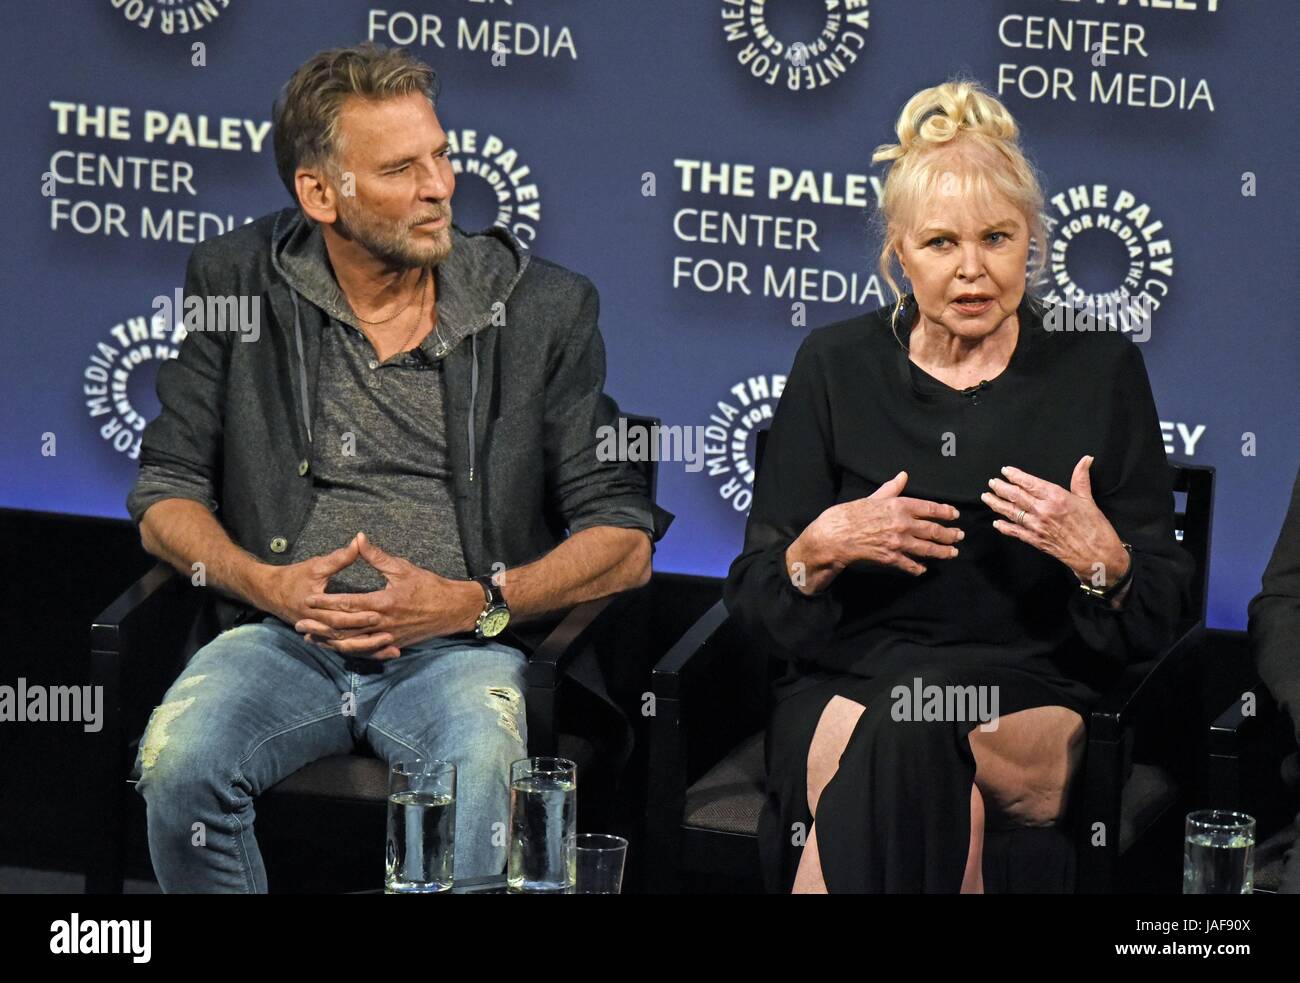 New York, NY, USA. 6th June, 2017. Kenny Loggins, Michelle Phillips in attendance for The Beatles' historic performance of ALL YOU NEED IS LOVE from Our World Tour in 1967 screened at PaleyLive, The Paley Center for Media, New York, NY June 6, 2017. Credit: Derek Storm/Everett Collection/Alamy Live News Stock Photo